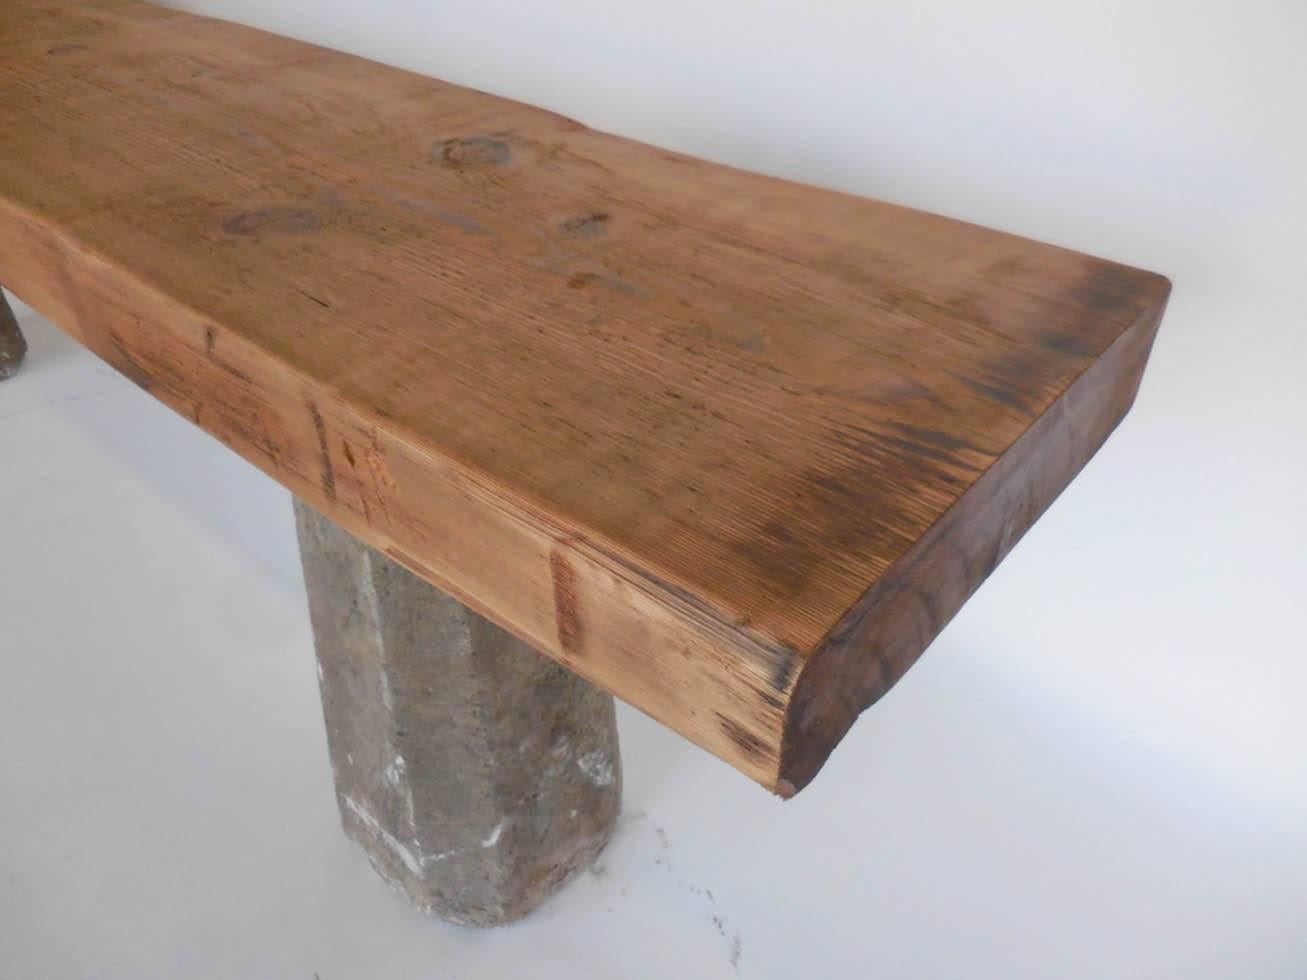 Reclaimed wood beam atop 19th century tapered stone bases from Guatemala. Wood and stone both show natural wear and patina. Sturdy and strong architectural piece. Top is smooth to the touch.